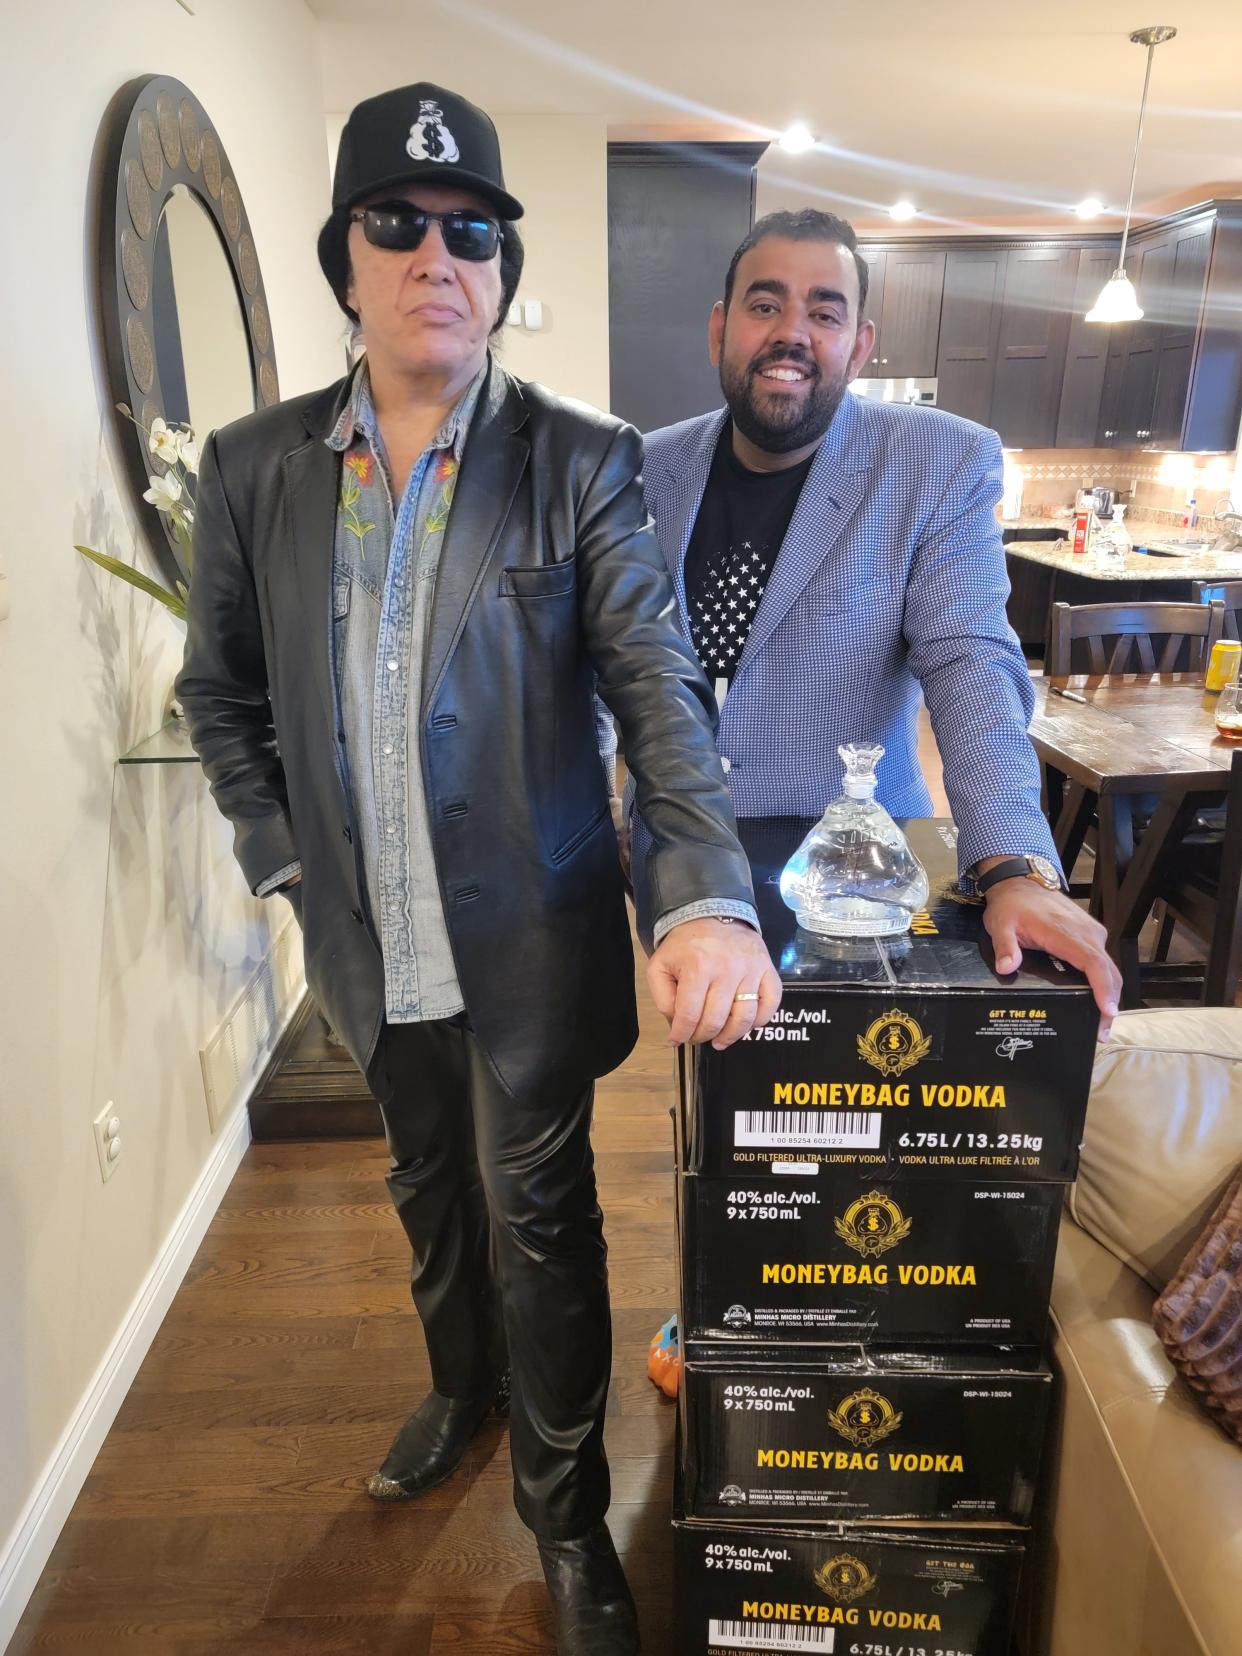 Ravidner Minhas, owner of Monroe's Minhas Brewery and Distillery, poses with Gene Simmons. The two created Simmons' MoneyBag Vodka